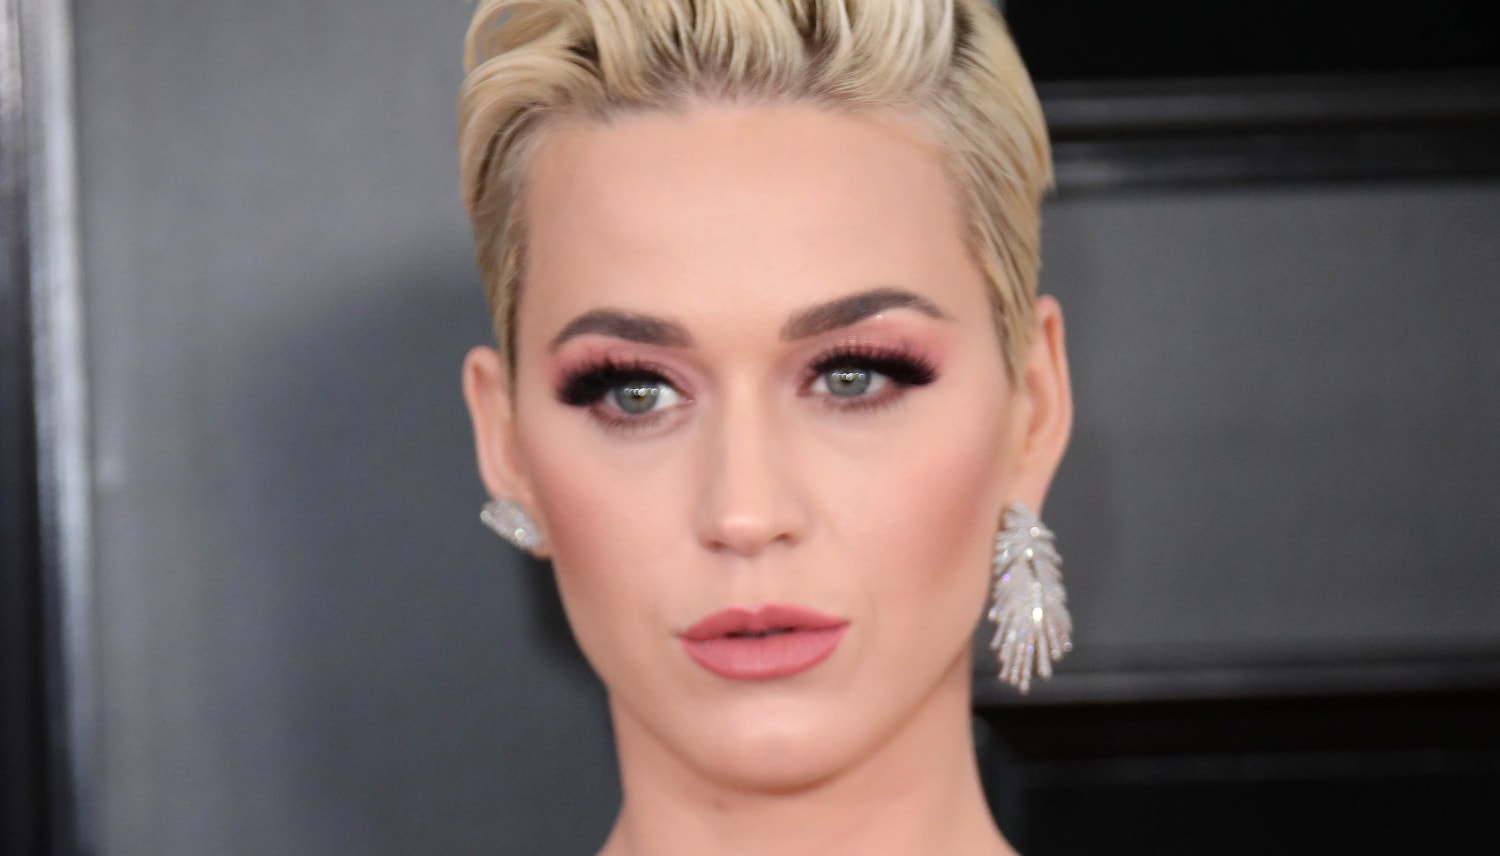 Katy Perry says she isn't 'very close' with former rival Taylor Swift, but 'we text a lot'